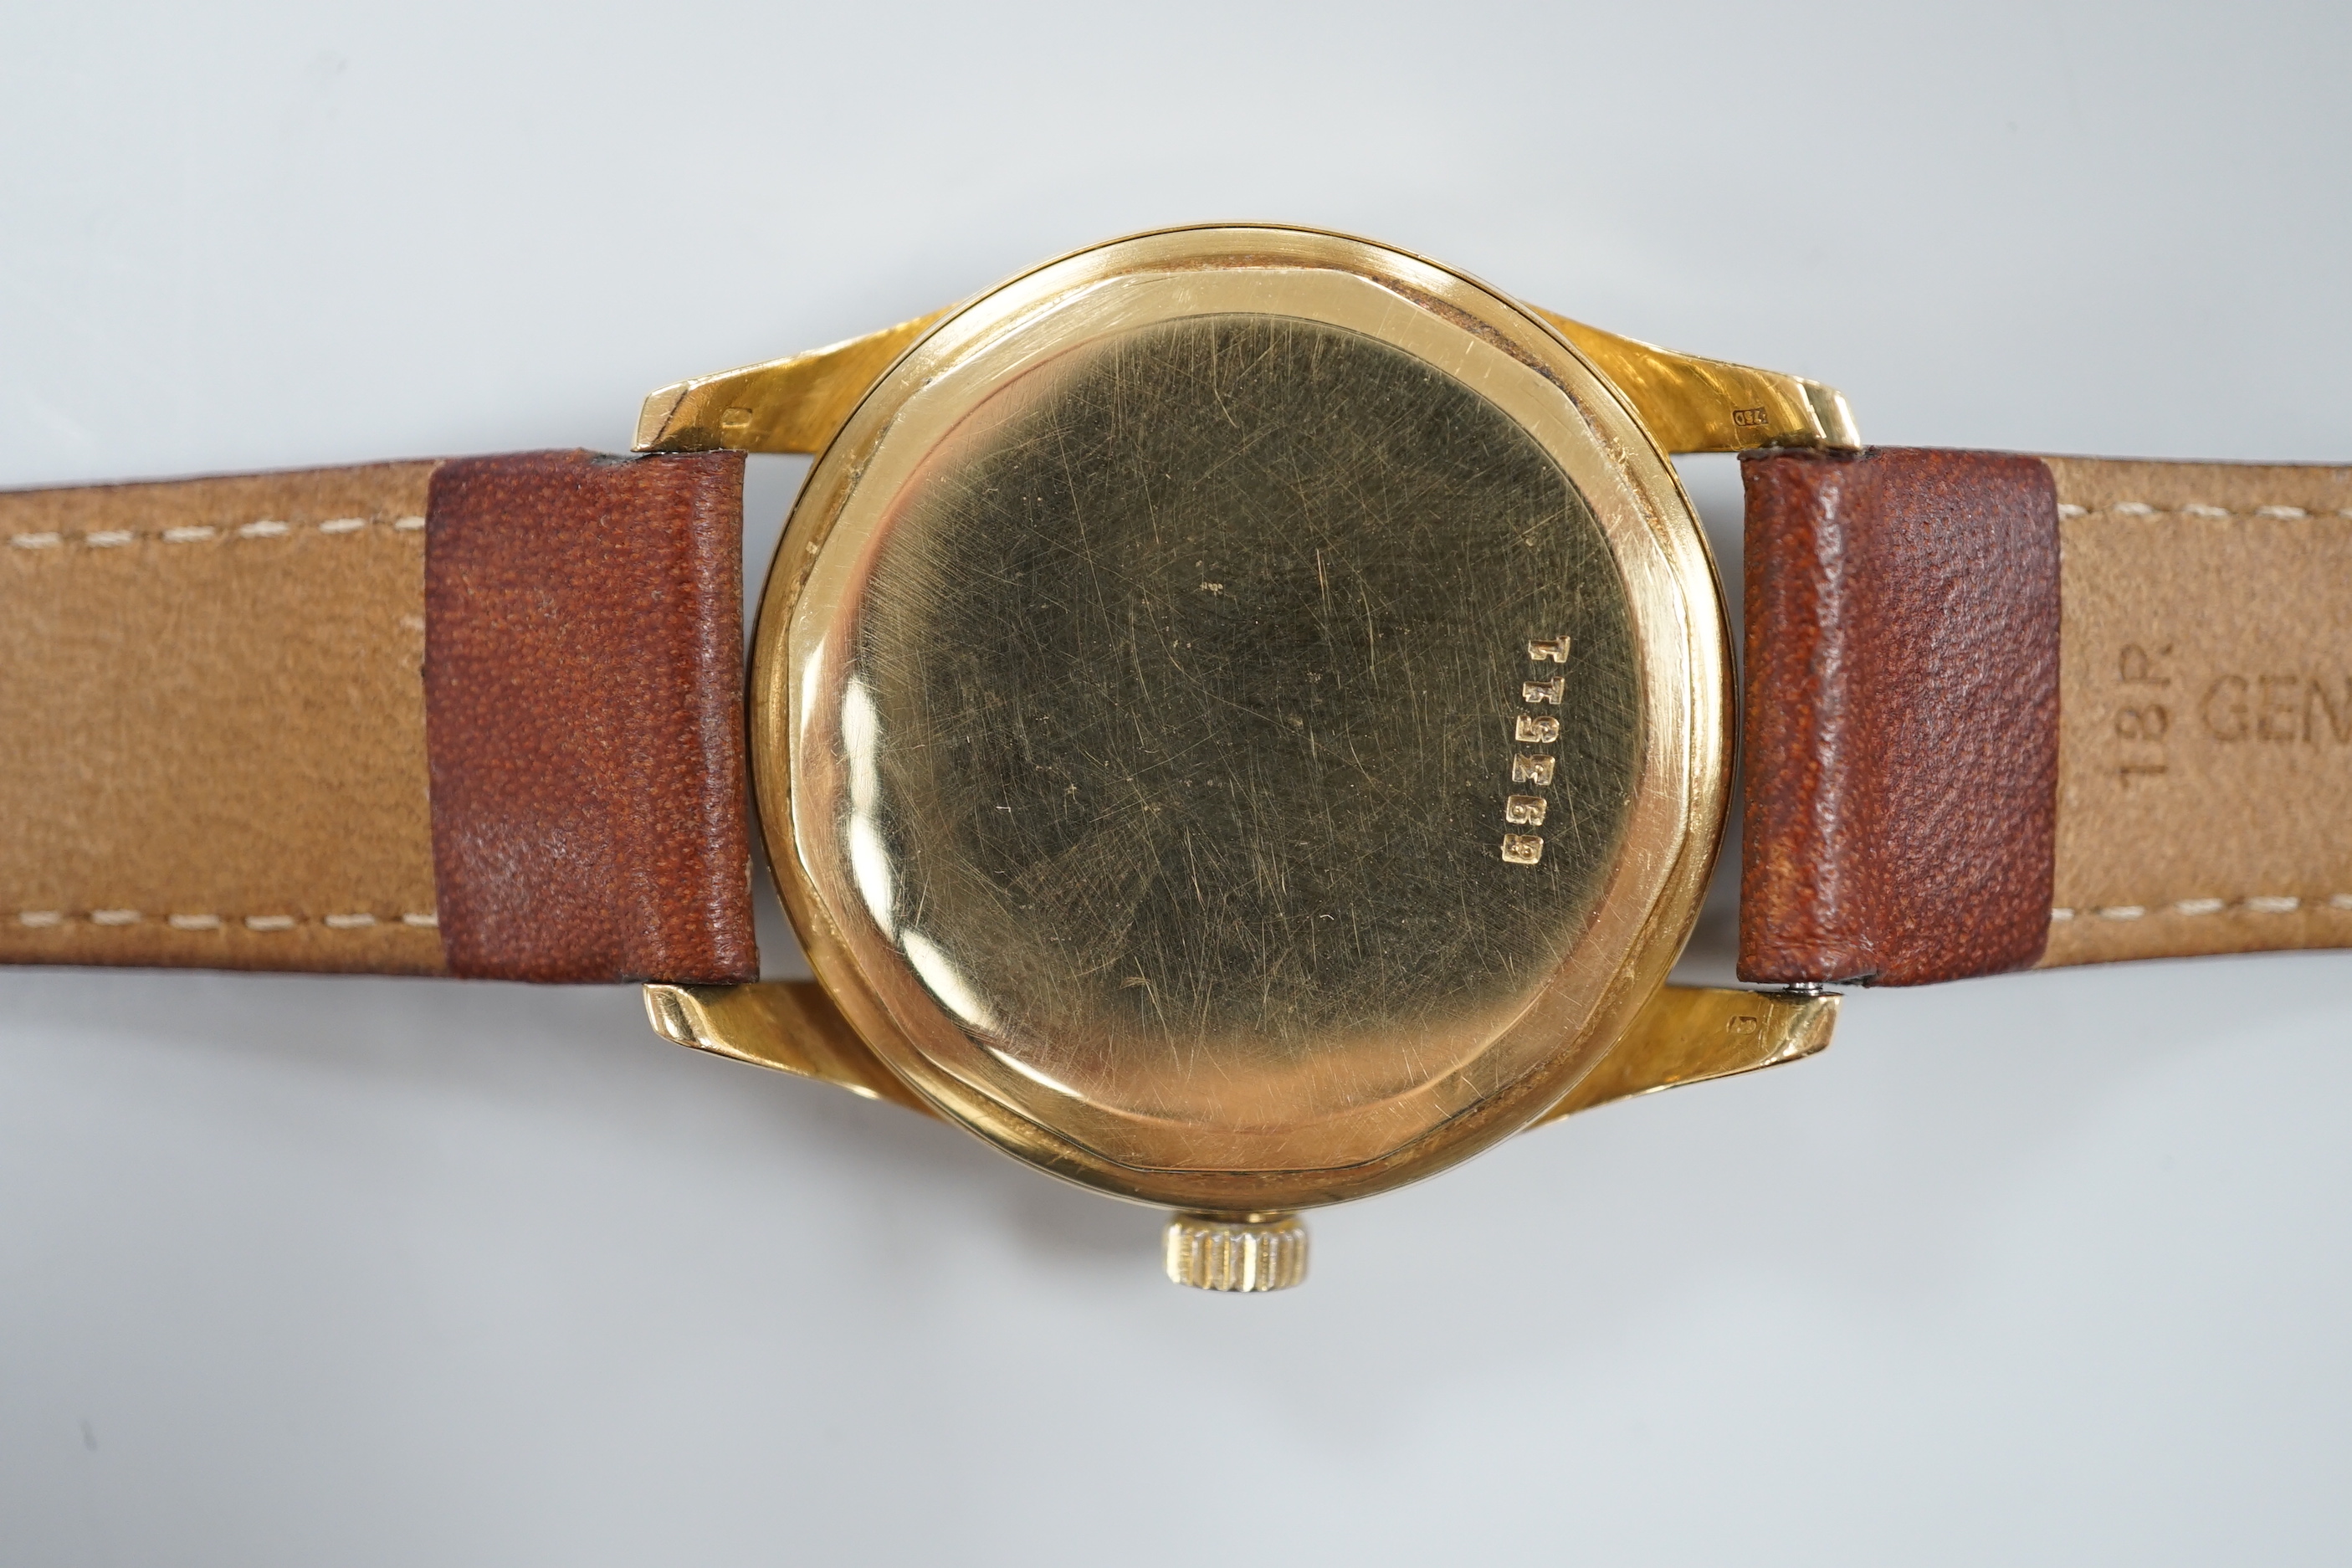 A gentleman's 18ct gold Zenith automatic bumper movement wrist watch, on associated leather strap, case diameter 33mm, no box or papers.